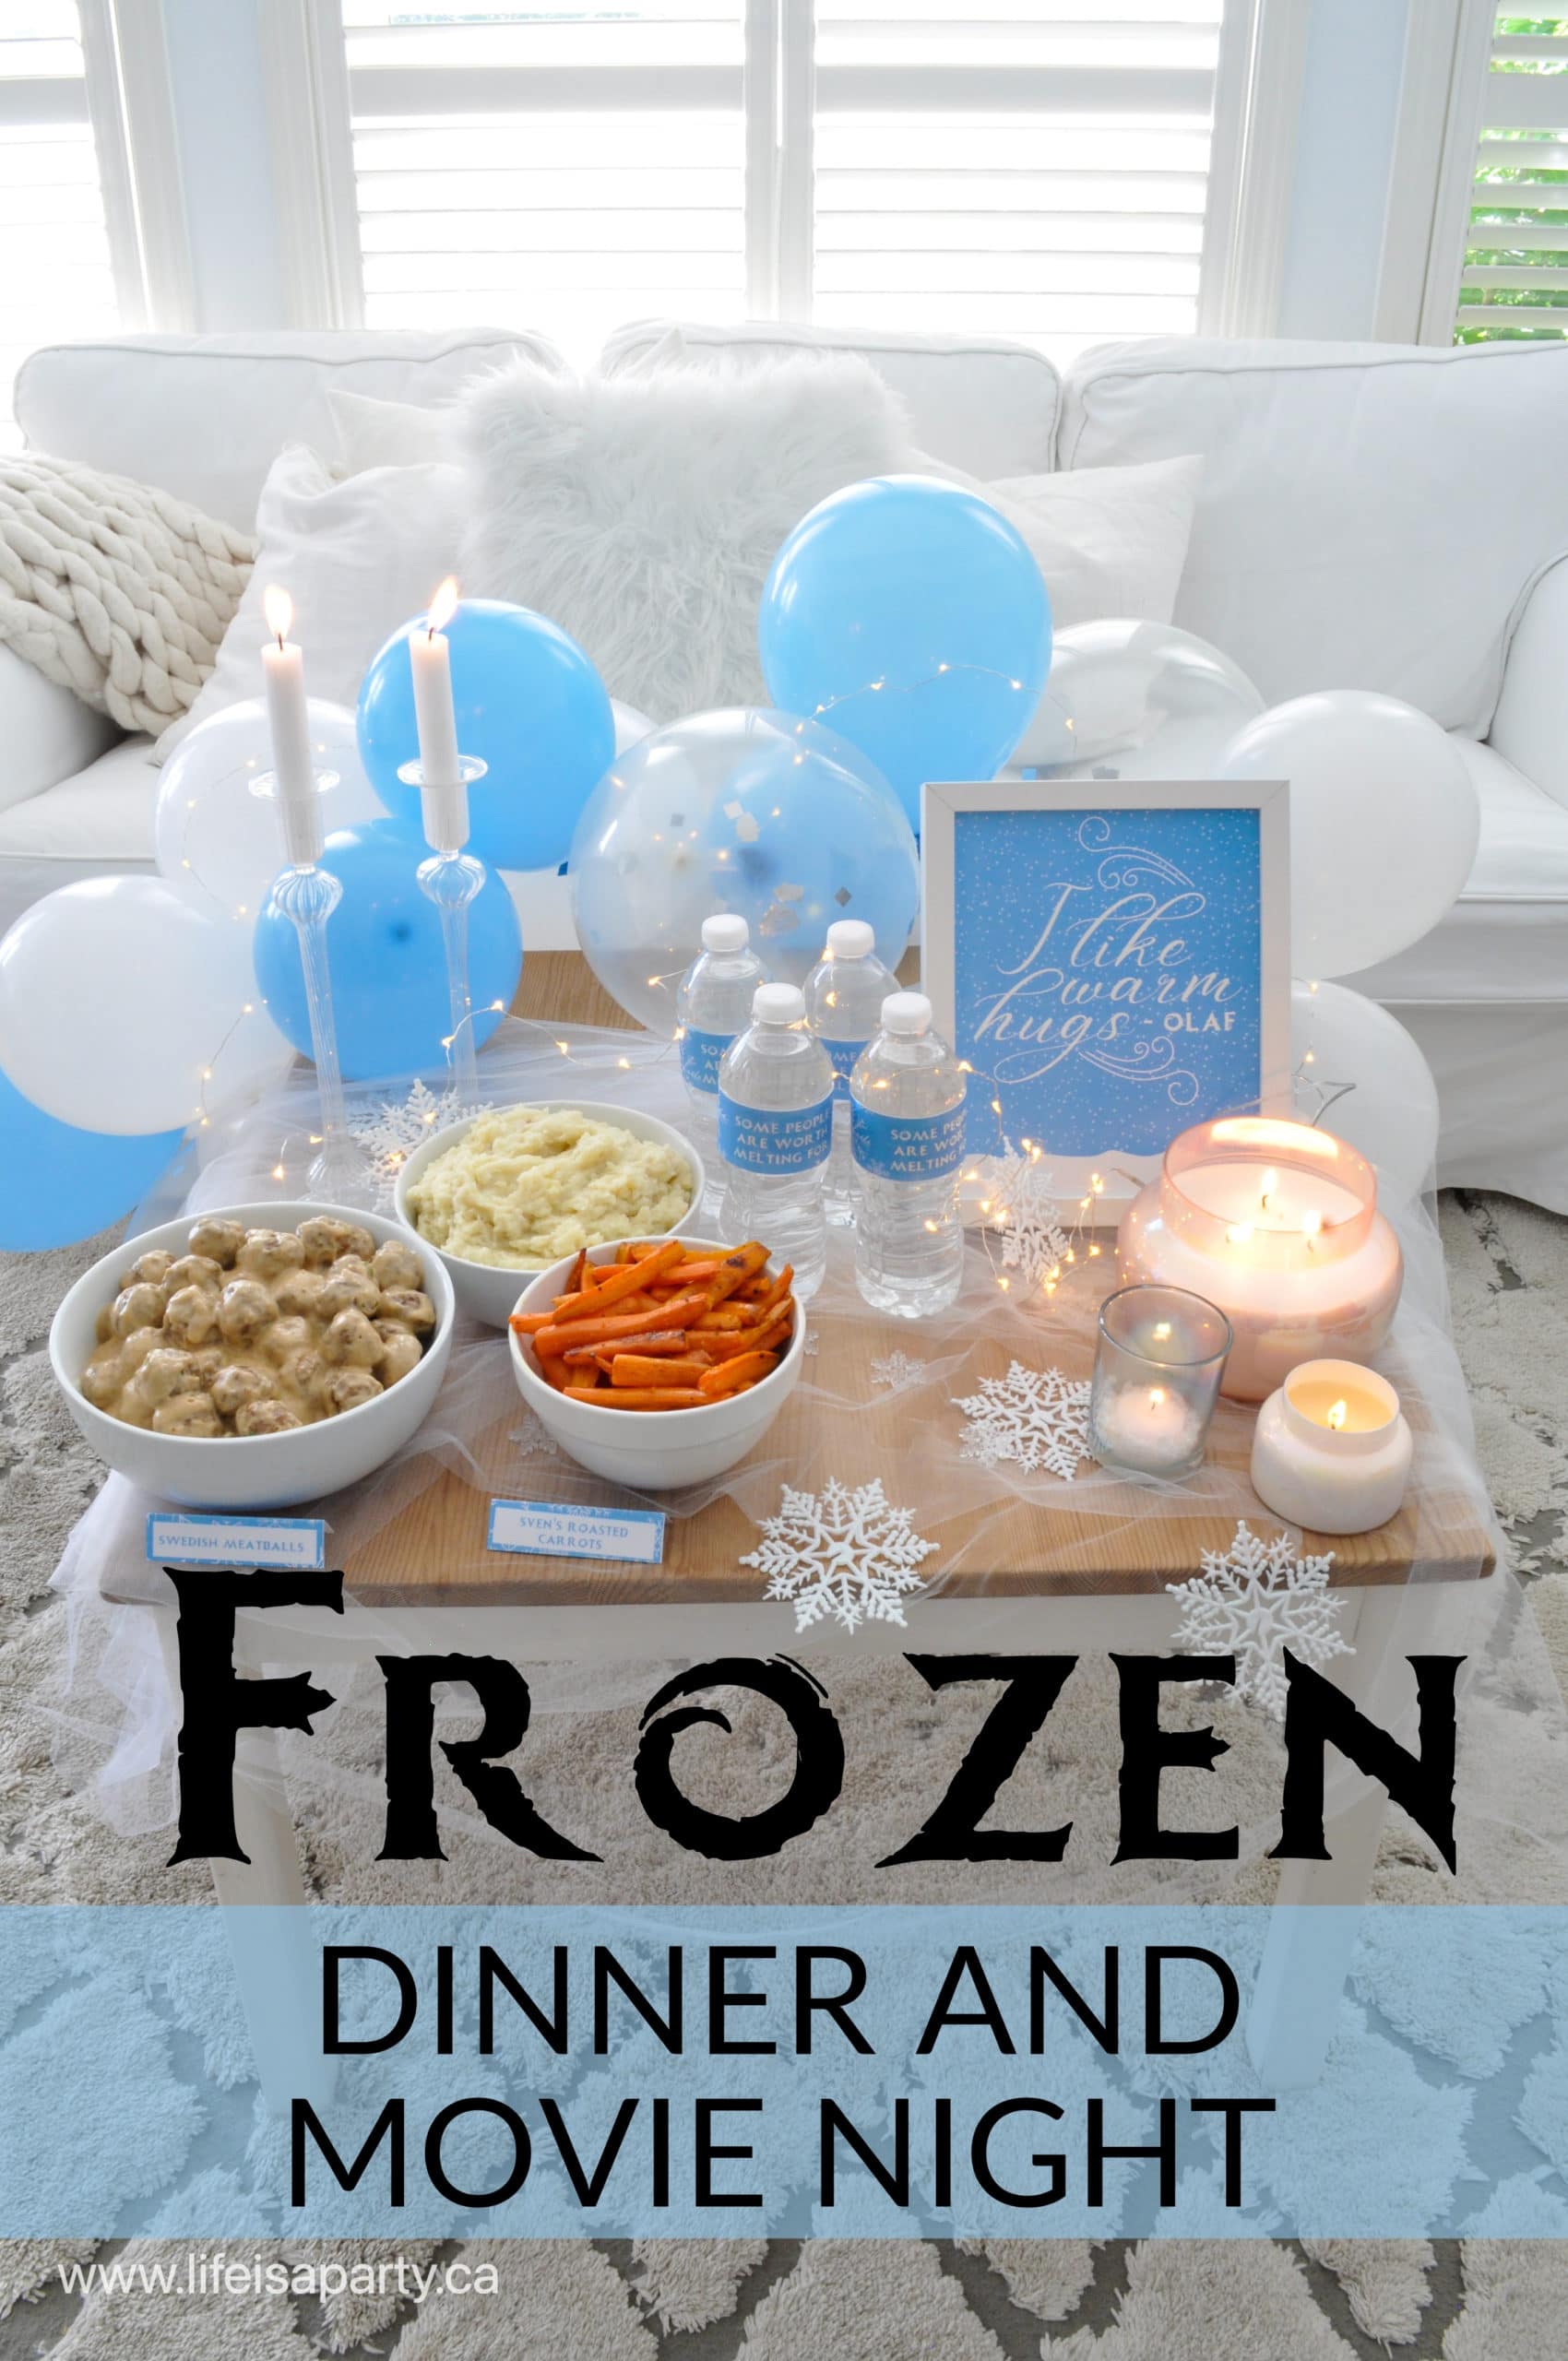 Frozen Themed Party -Dinner and Movie Night: Swedish meatballs, Sven's roasted carrots, and Frozen Ice Cream Sundaes with plenty of chocolate.